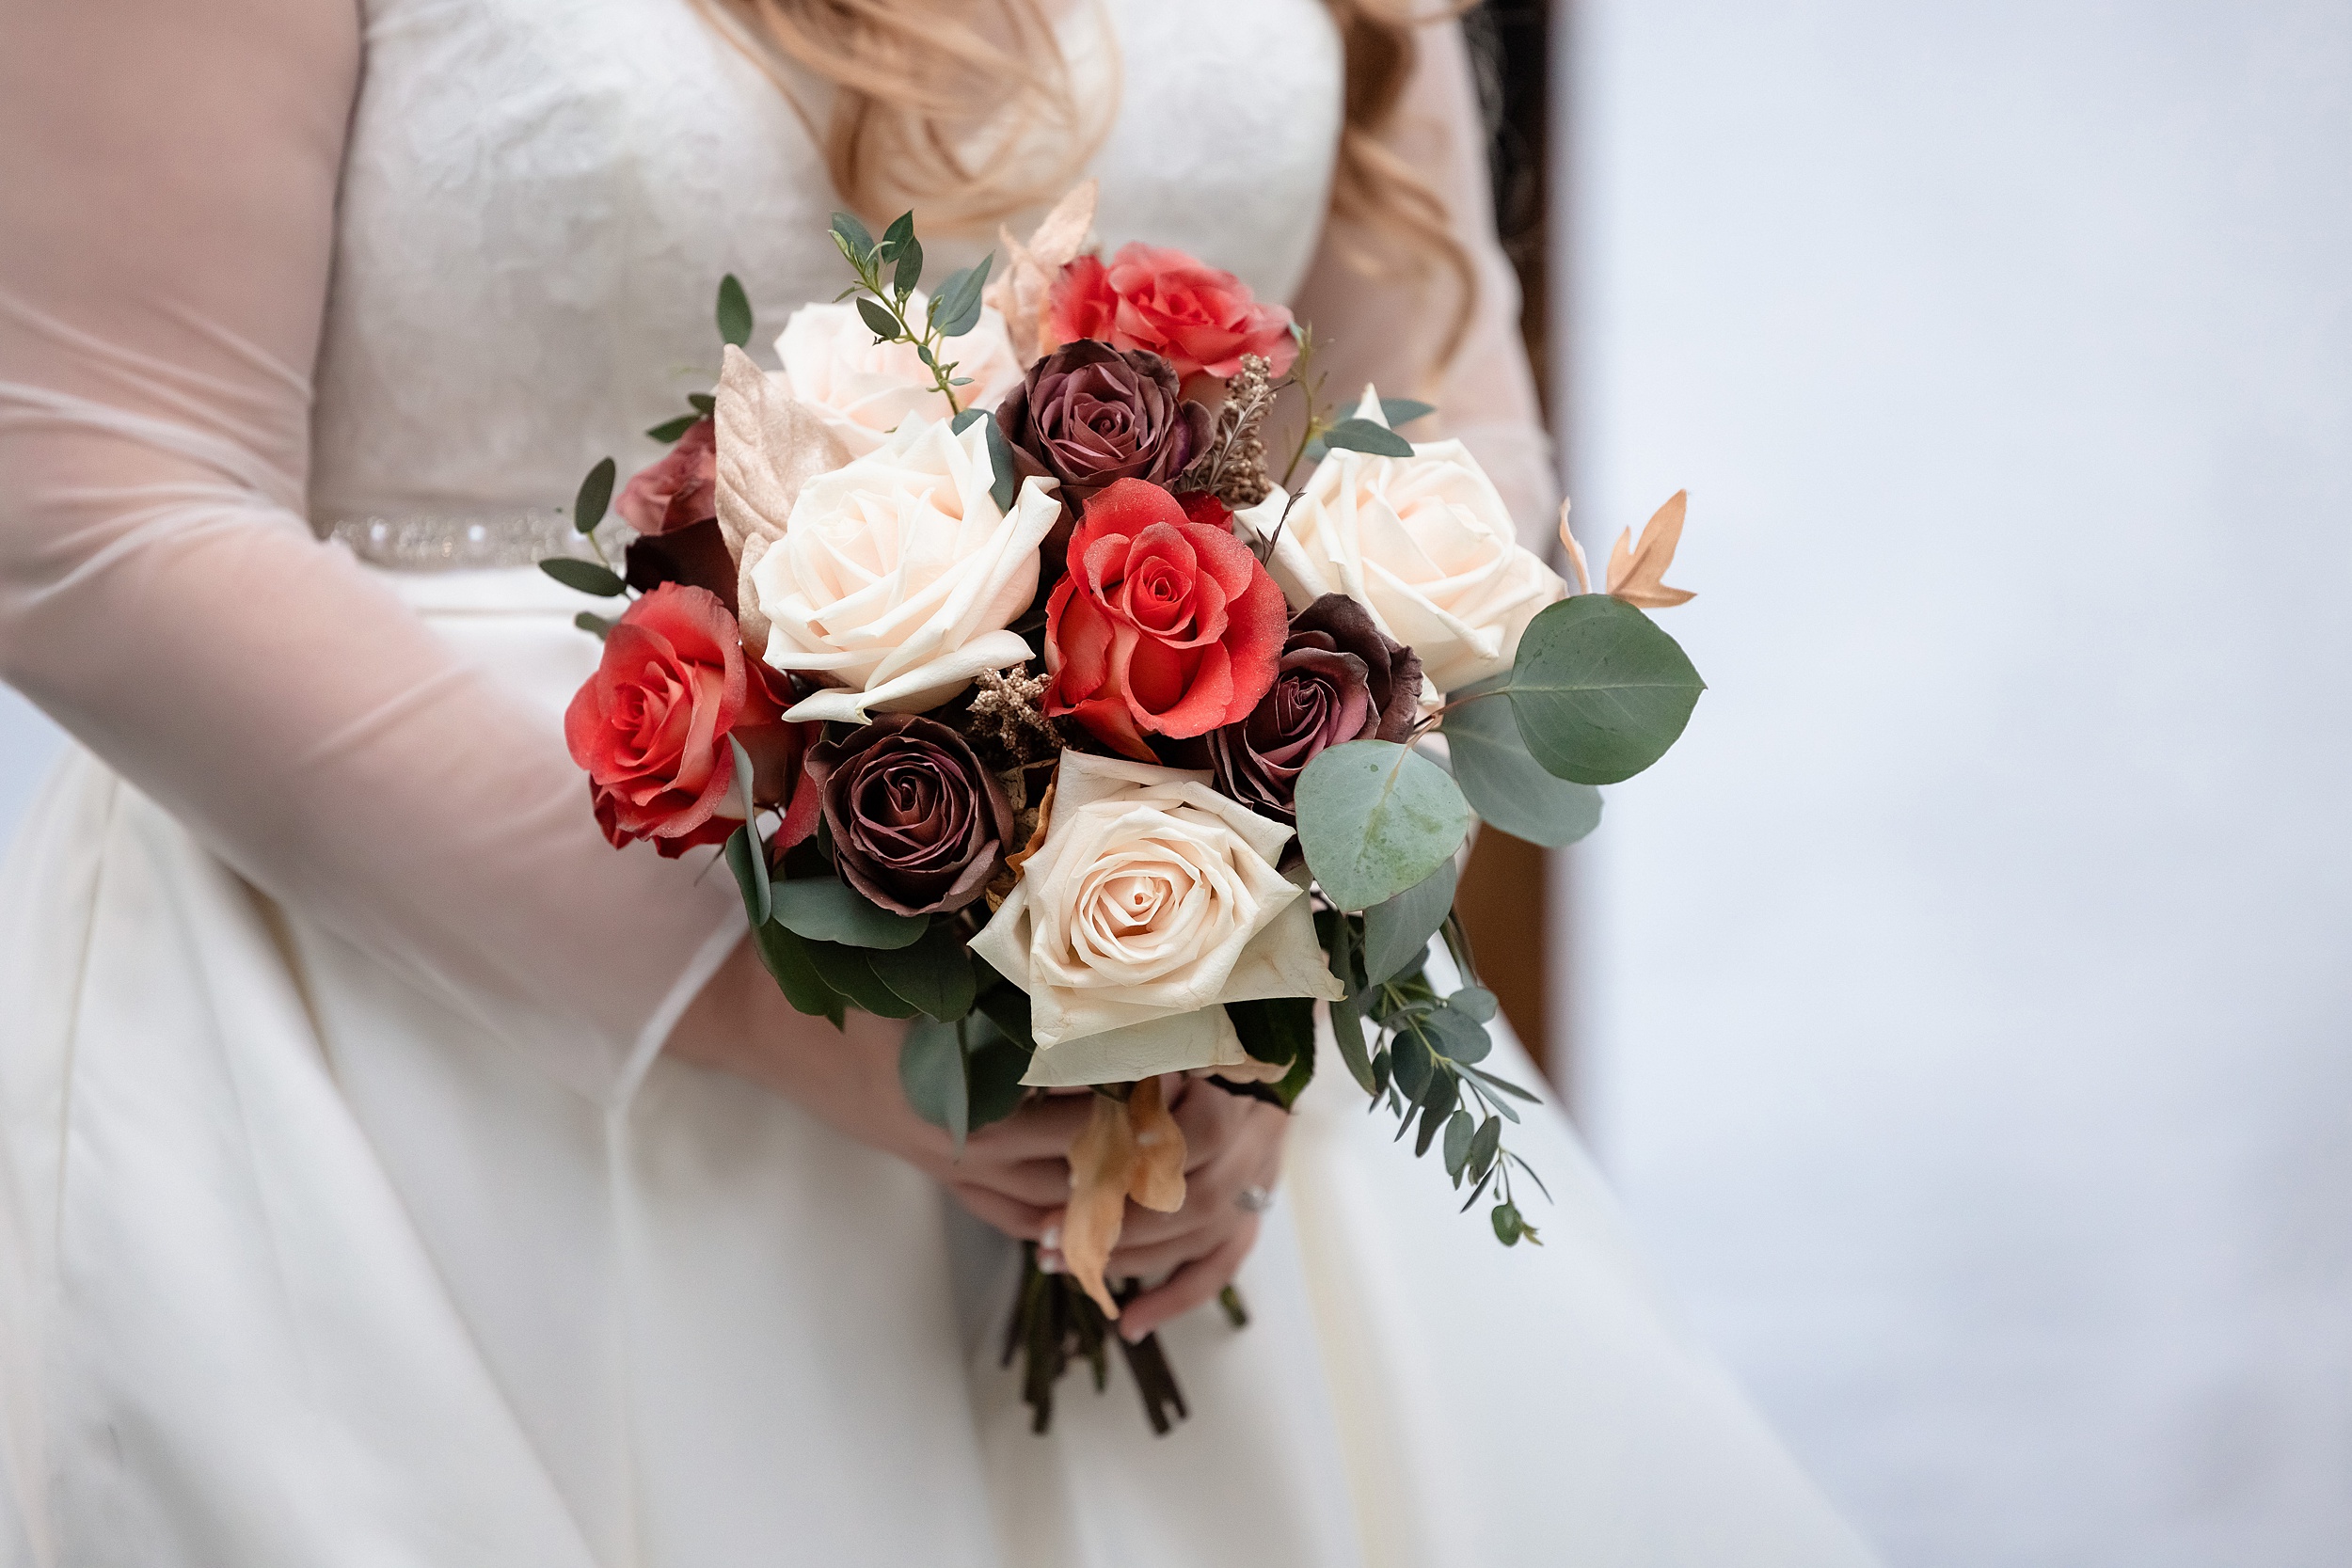 Details of a bride's bouquet with red, purple and white roses at her the enchanting barn wedding